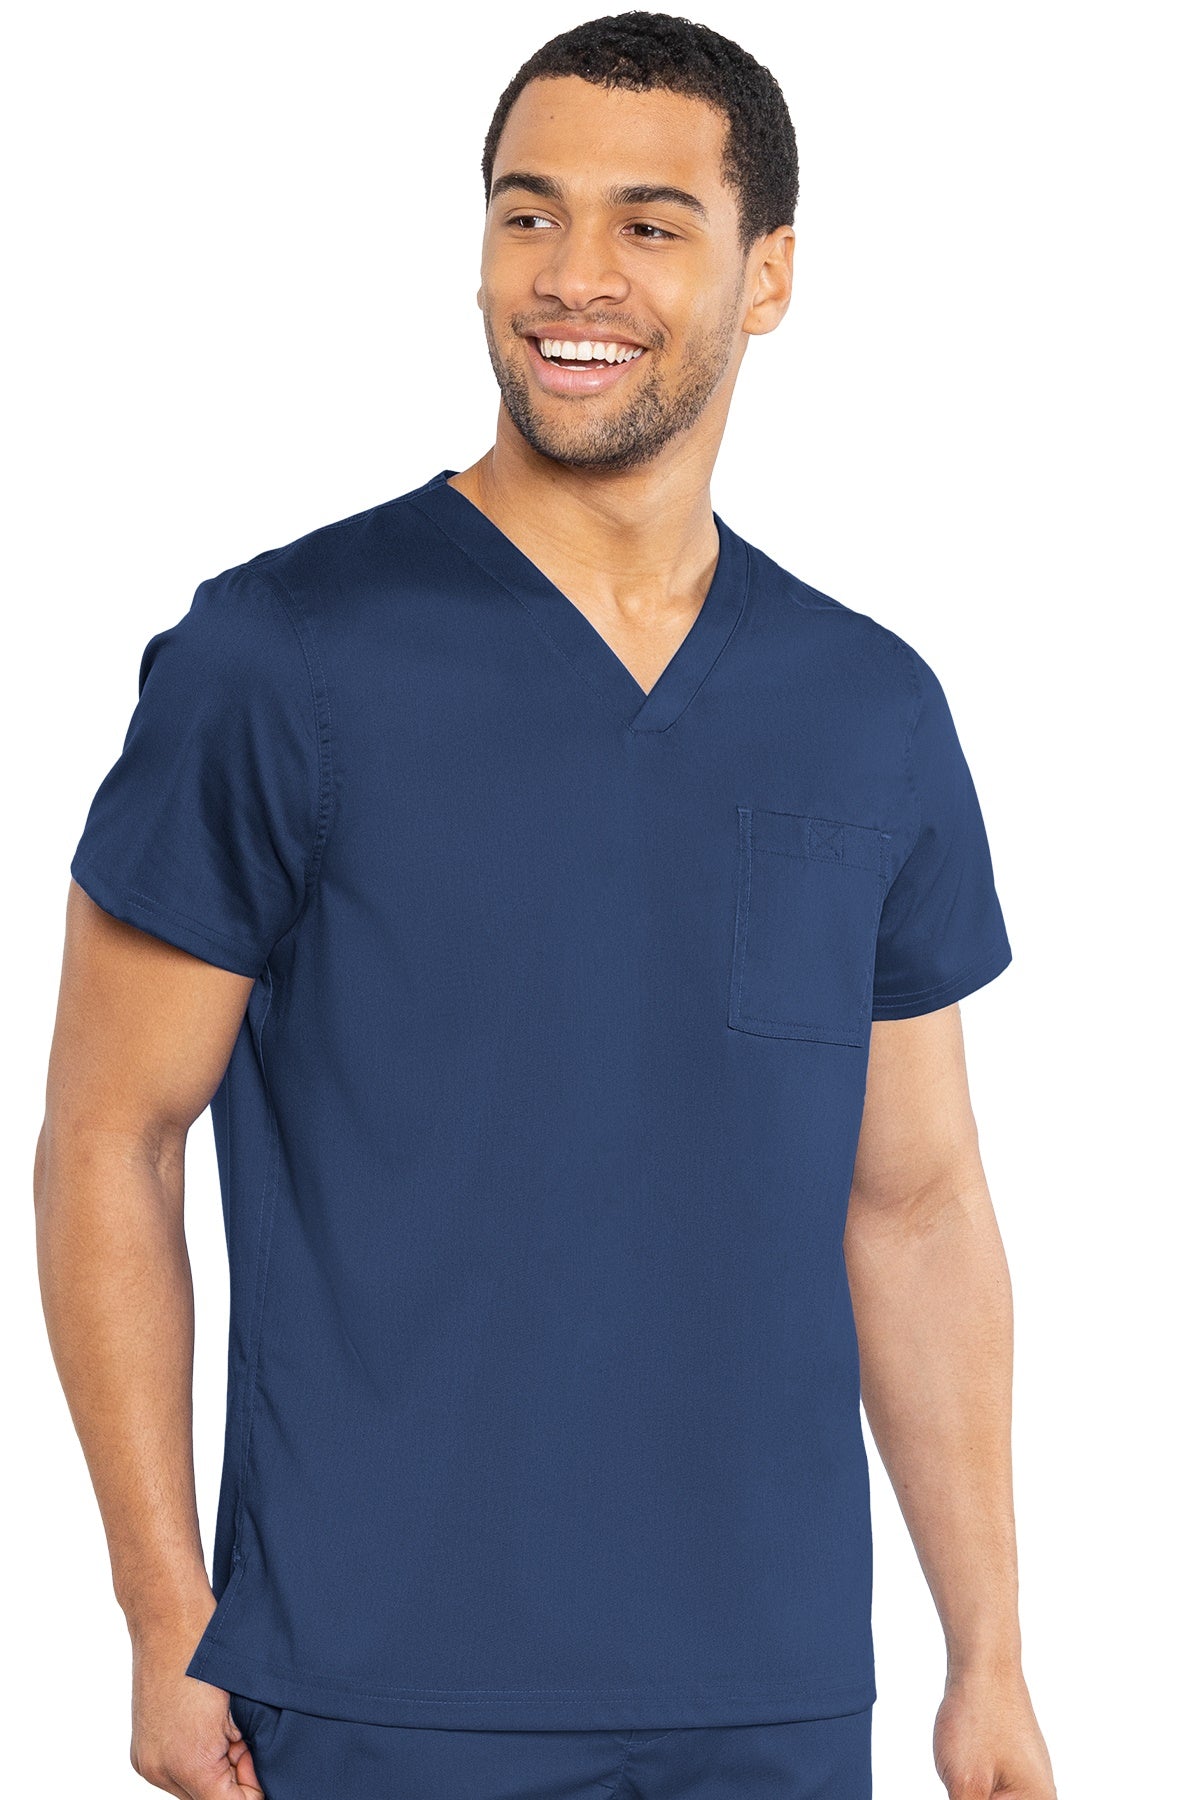 Med Couture Mens Scrub Top RothWear Cadence in Navy at Parker's Clothing and Shoes.